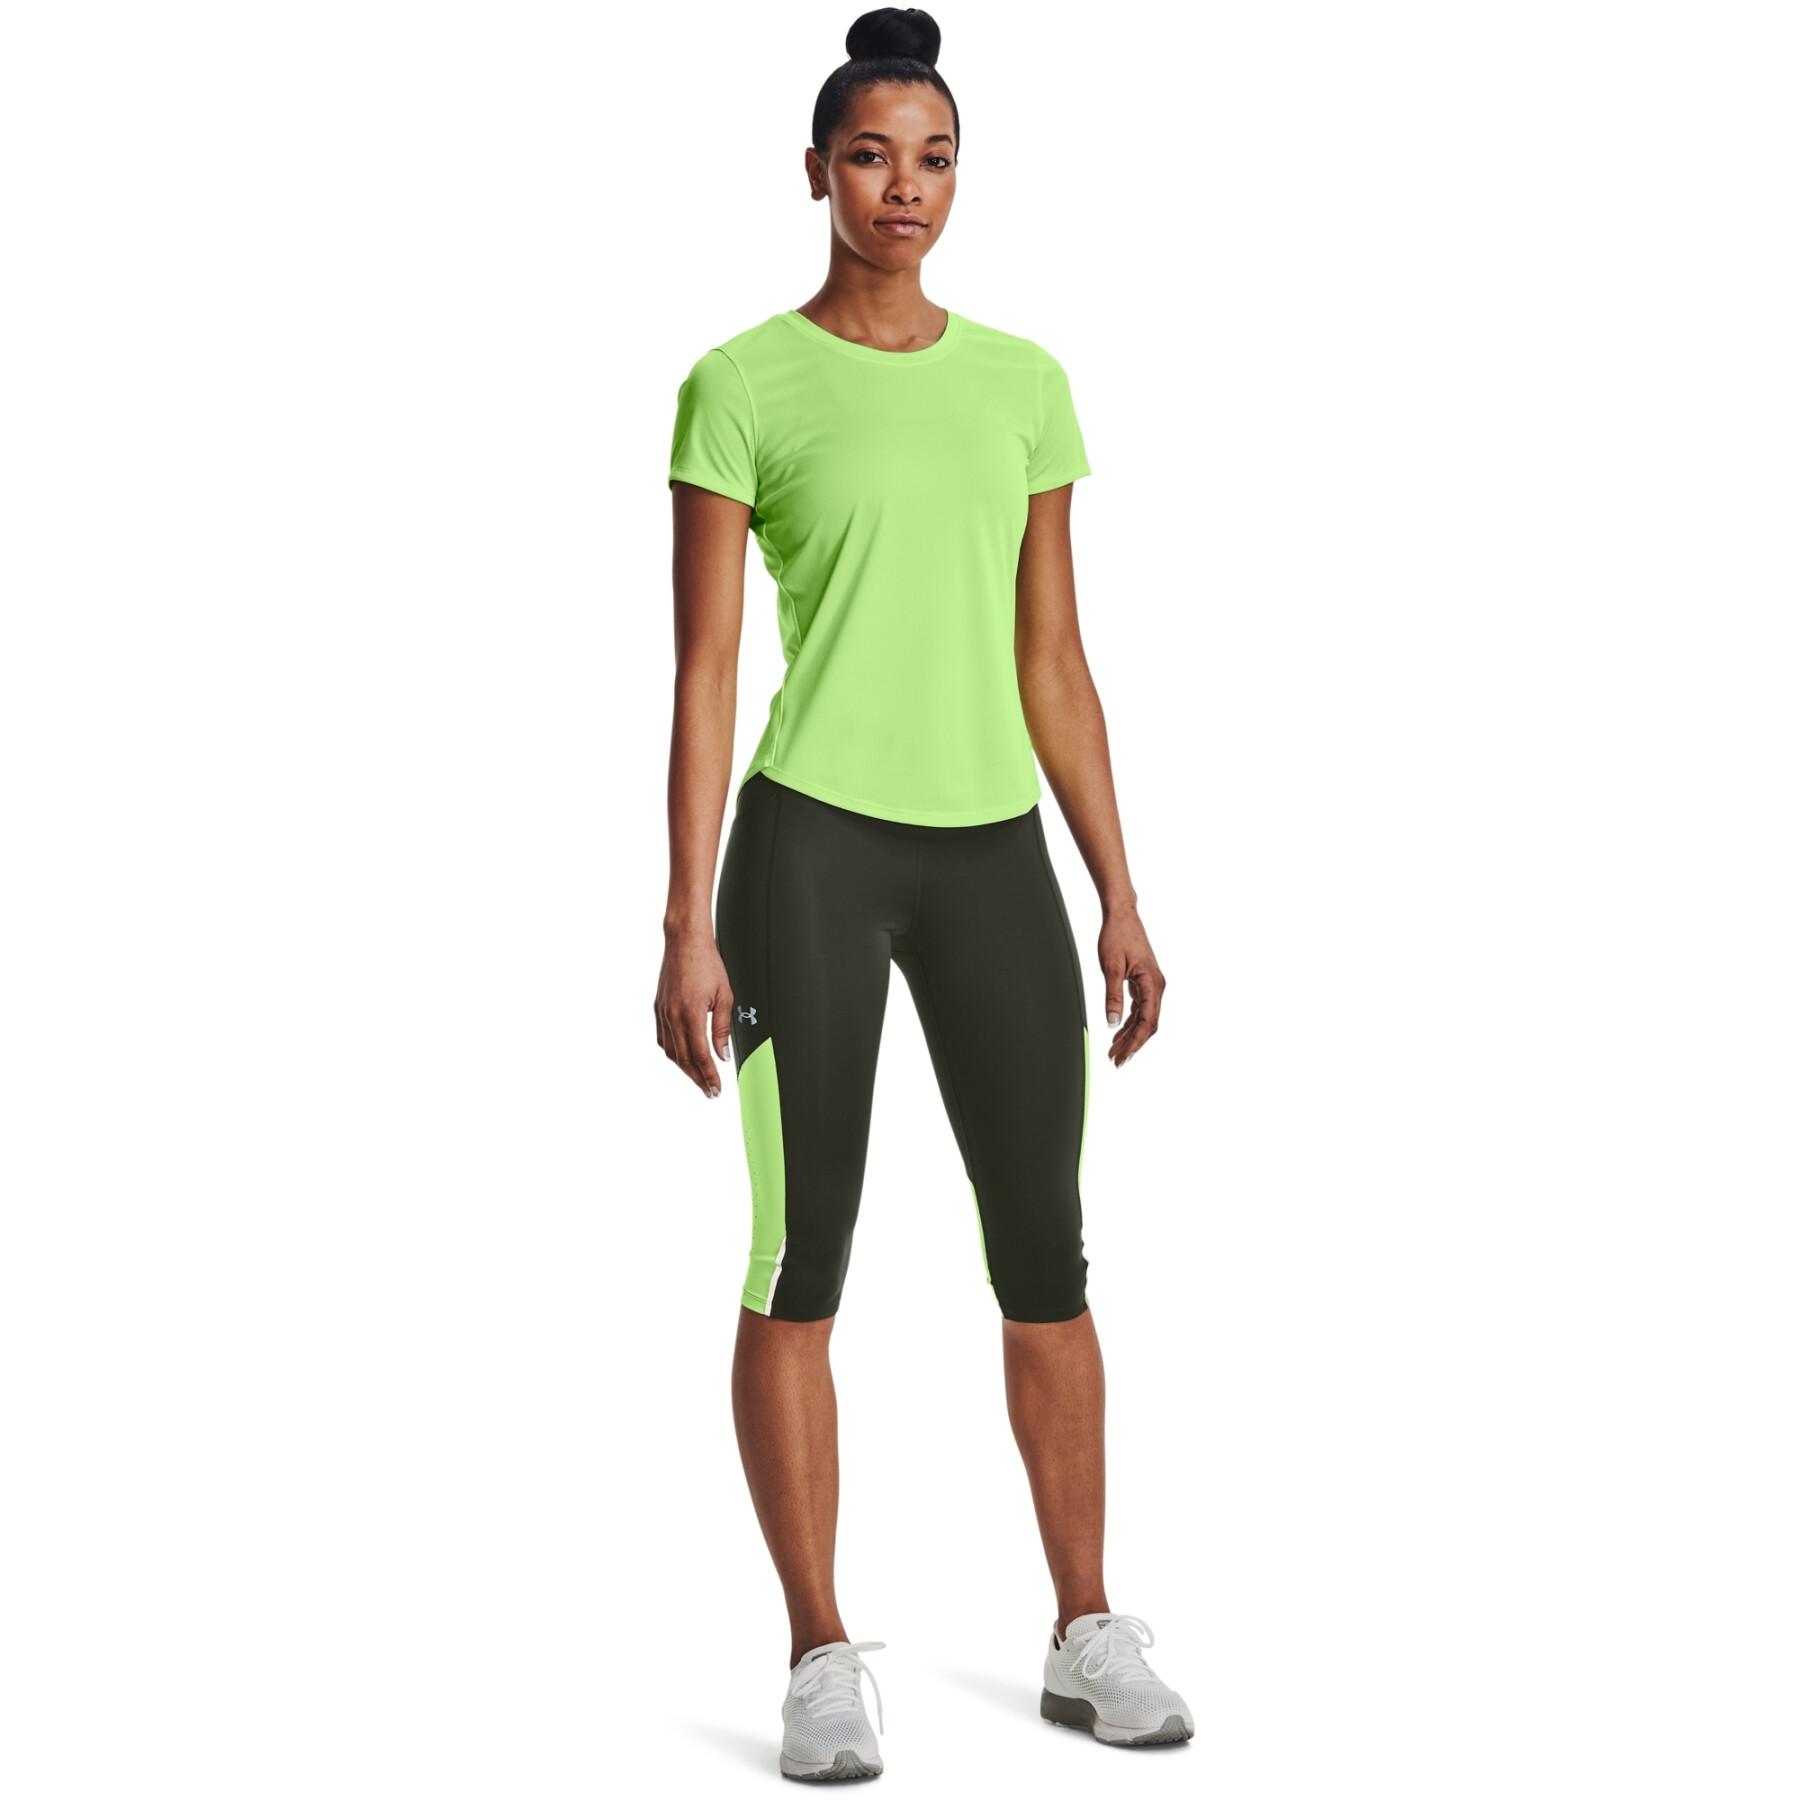 Legging corsair woman Under Armour Fly fast 3.0 speed